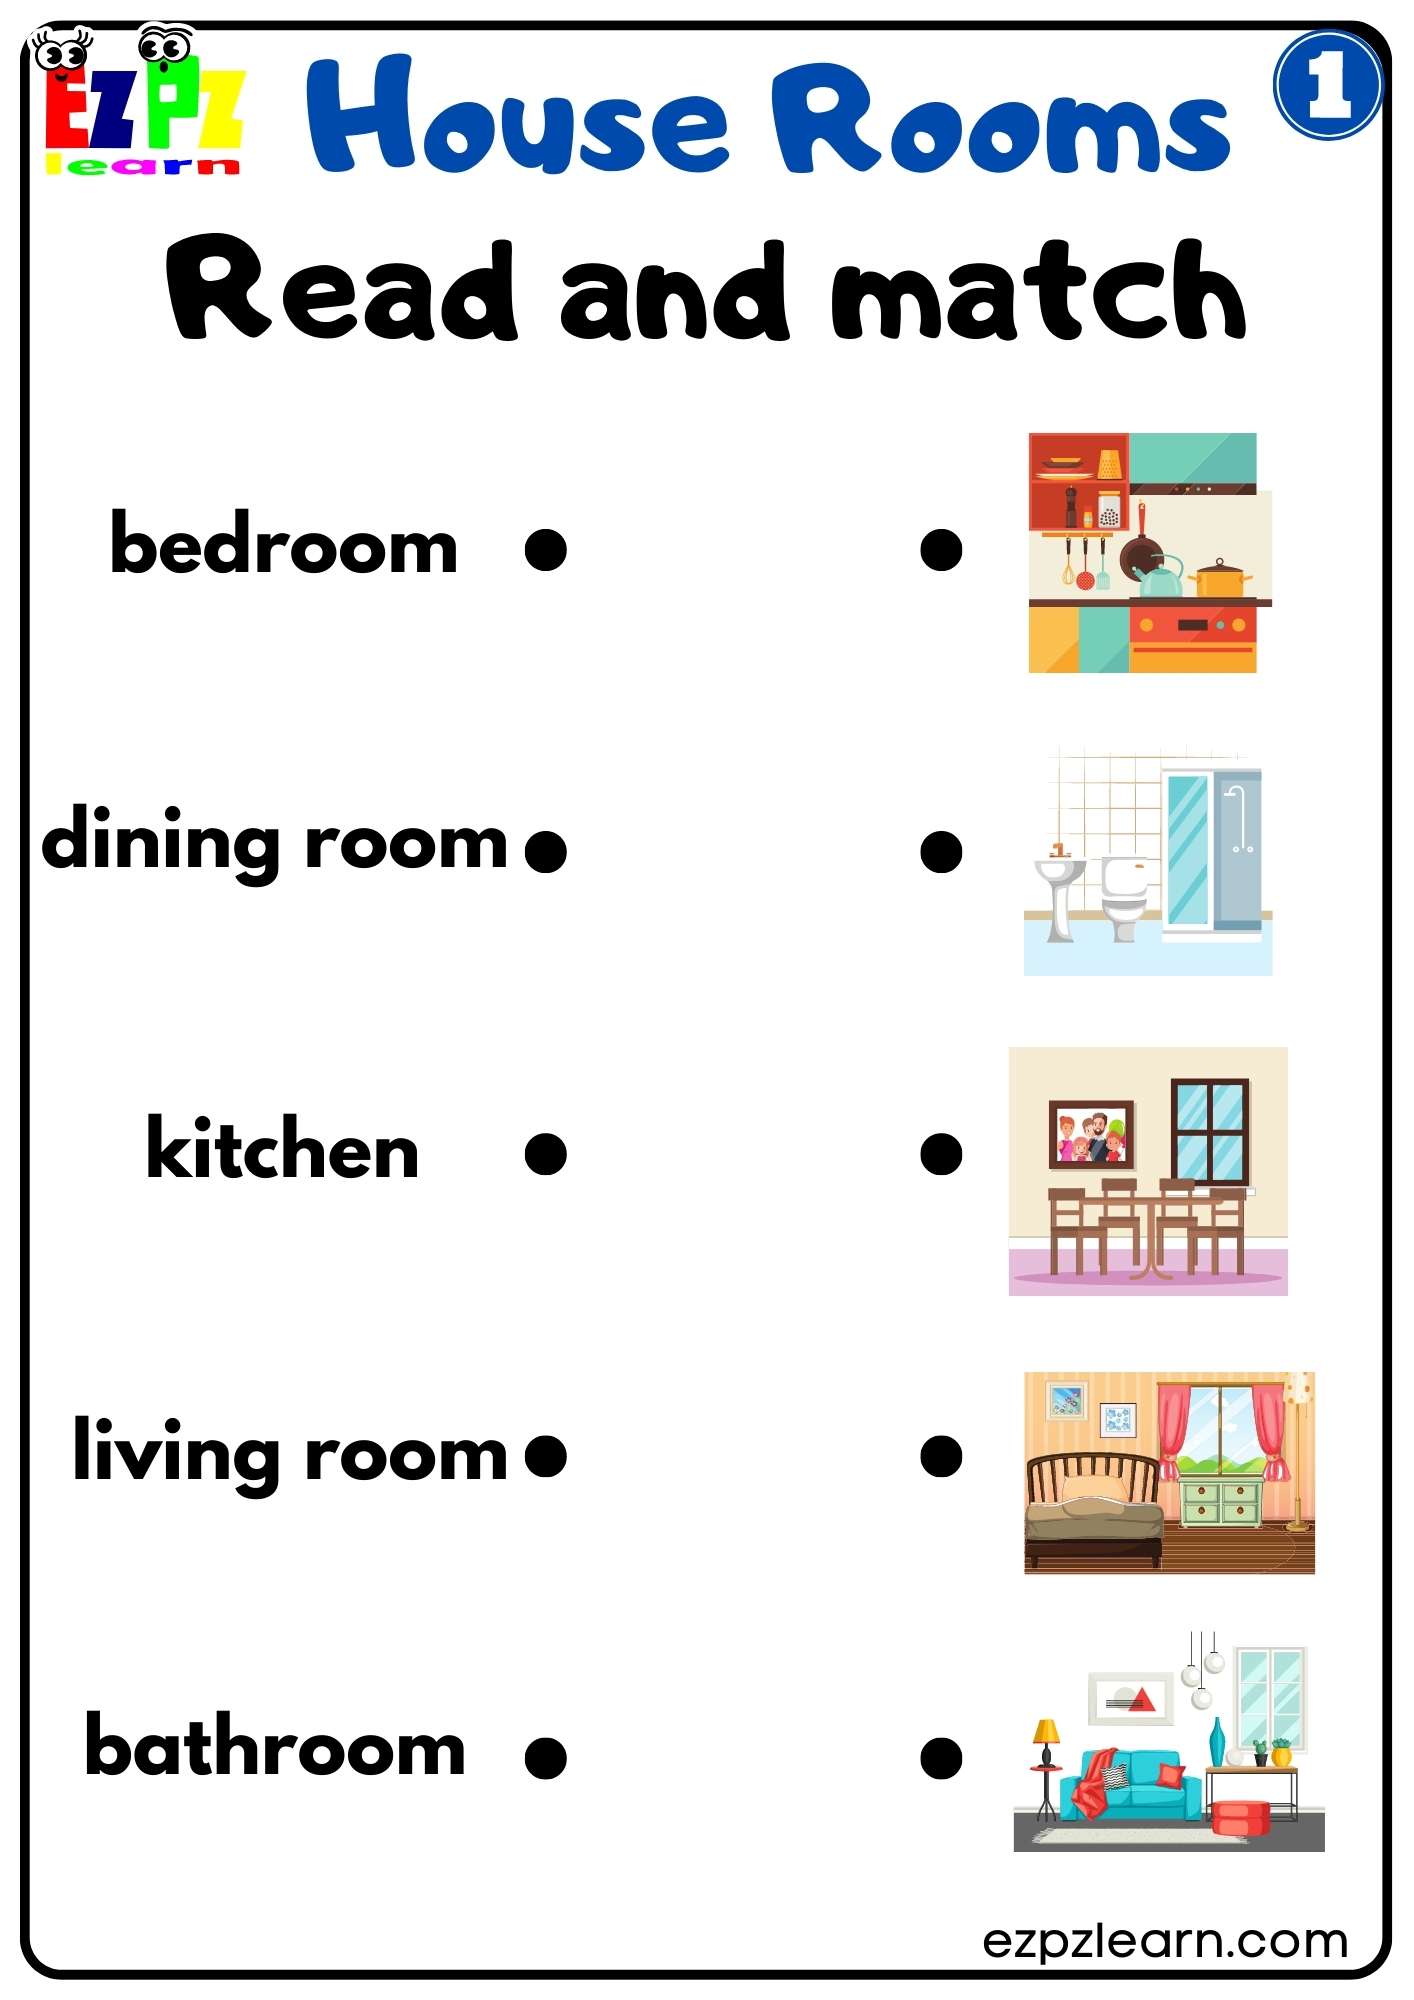 Rooms Of The House Vocabulary Game